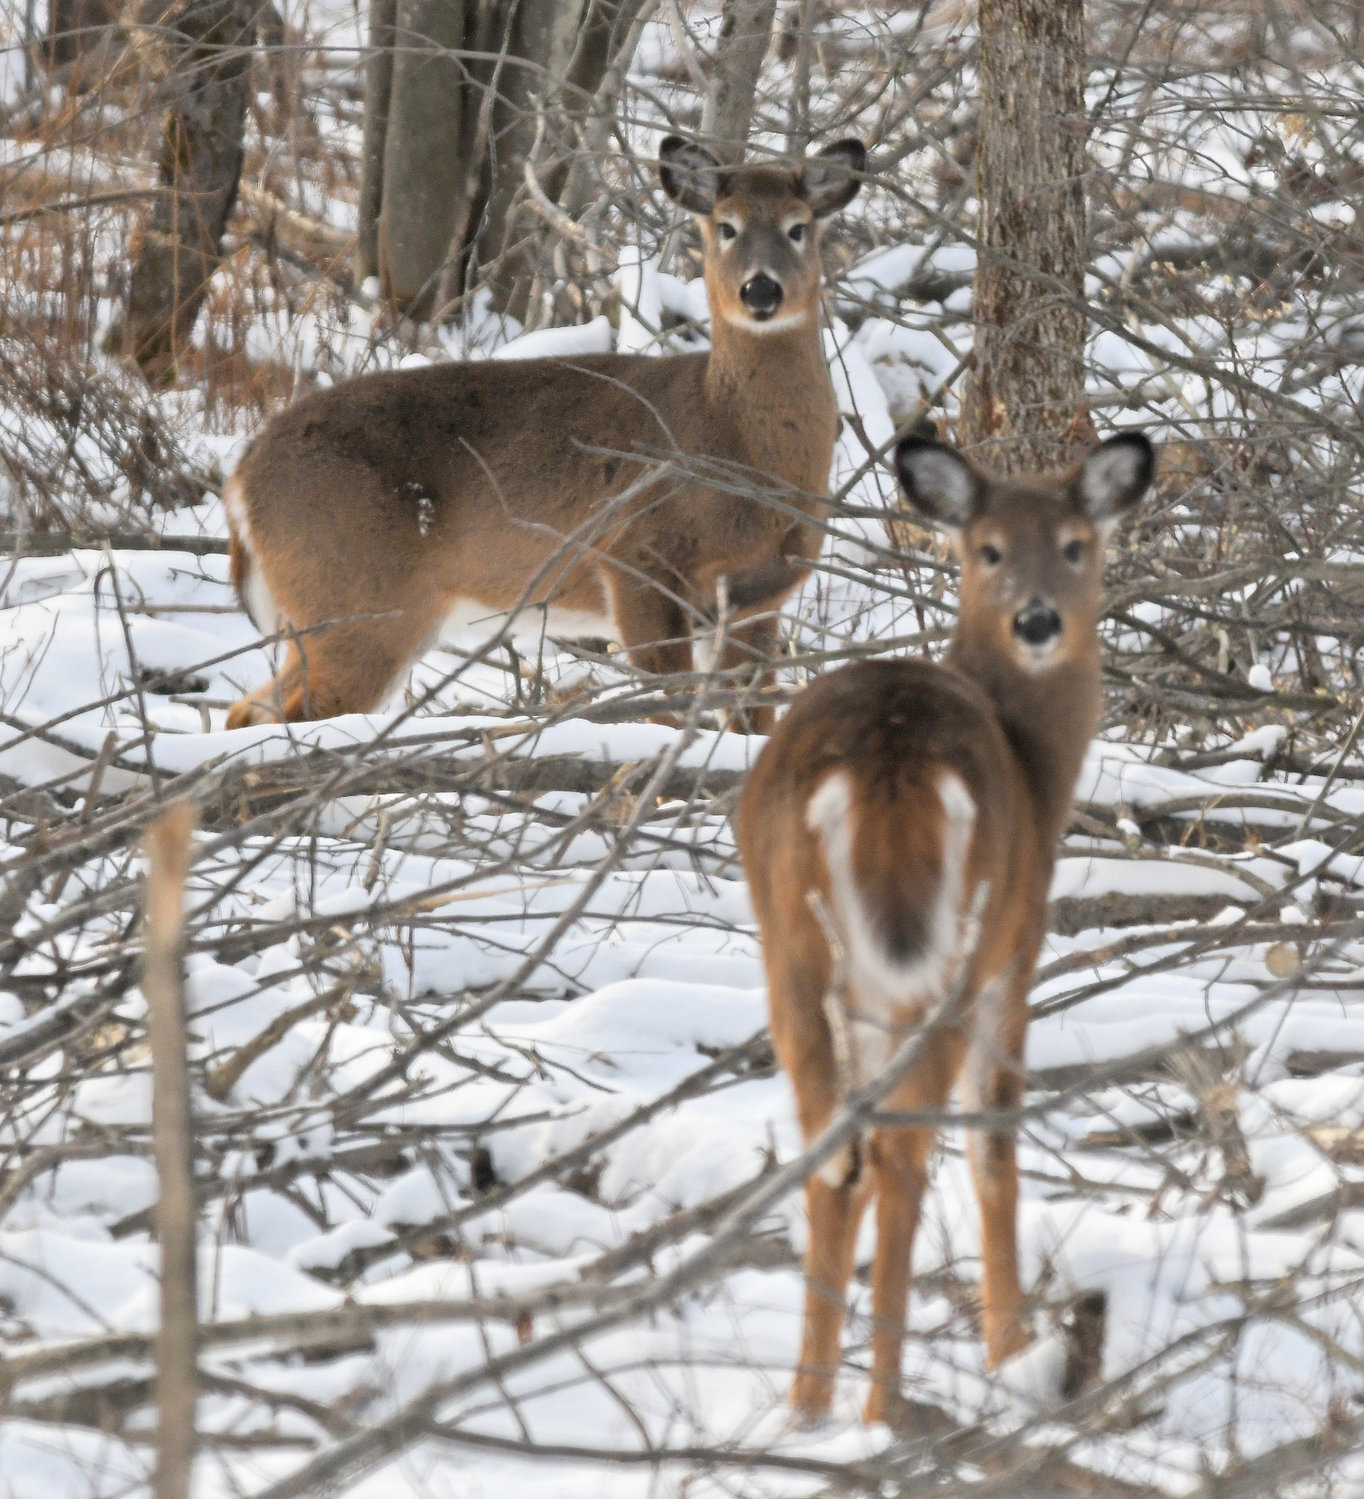 WHITETAIL IN THE WOODS — After given the opportunity, Madison County opted out of the late-season holiday hunting, citing a need for safety and consideration of others using Madison County land. Pictured: A pair deer out on Wynn Rd. in Remsen.